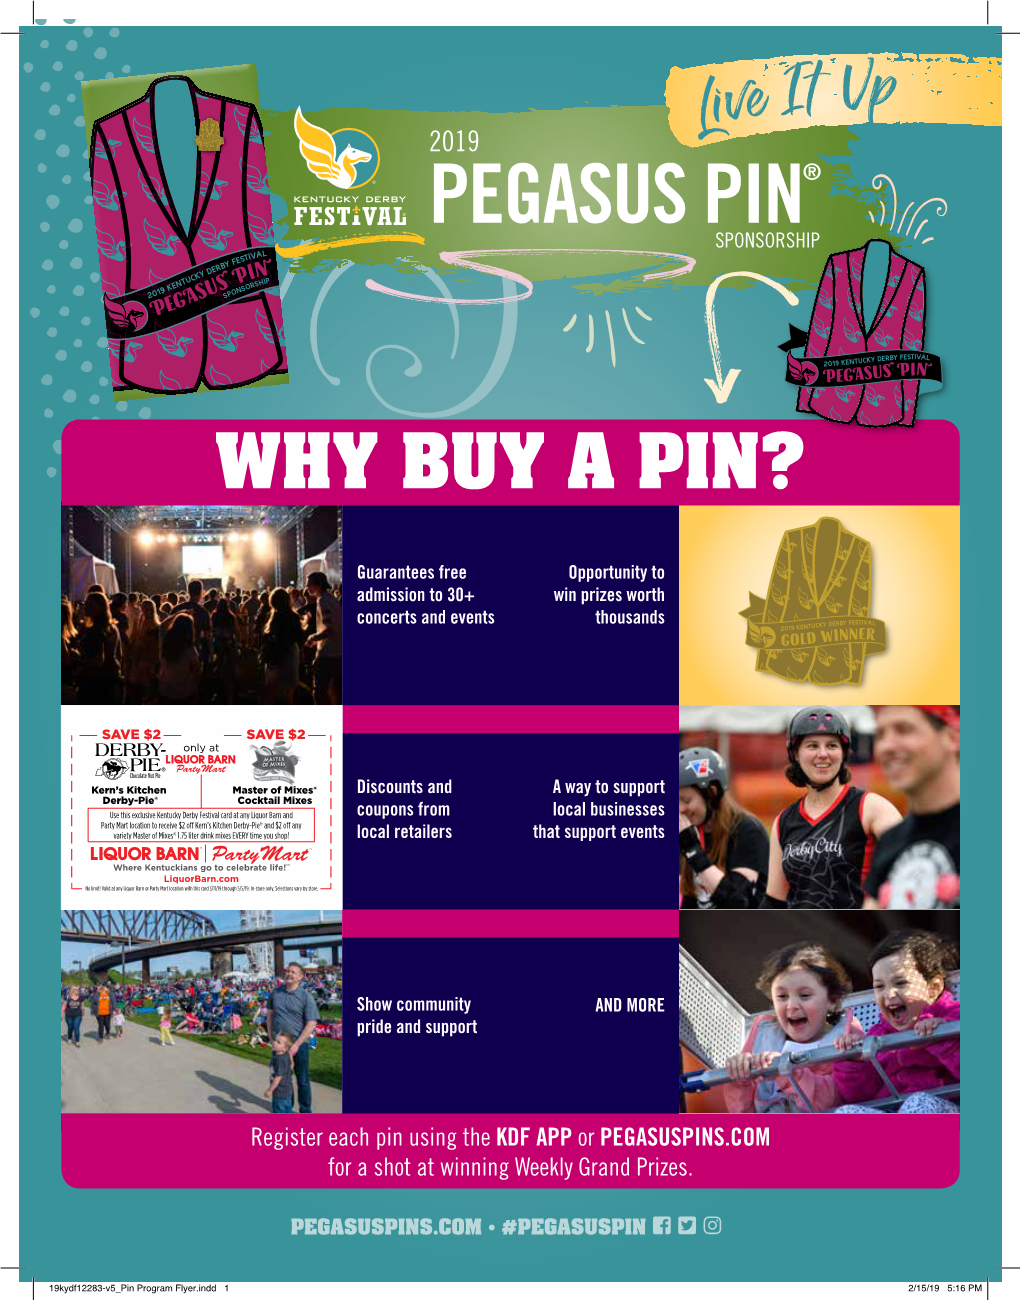 Why Buy a Pin?